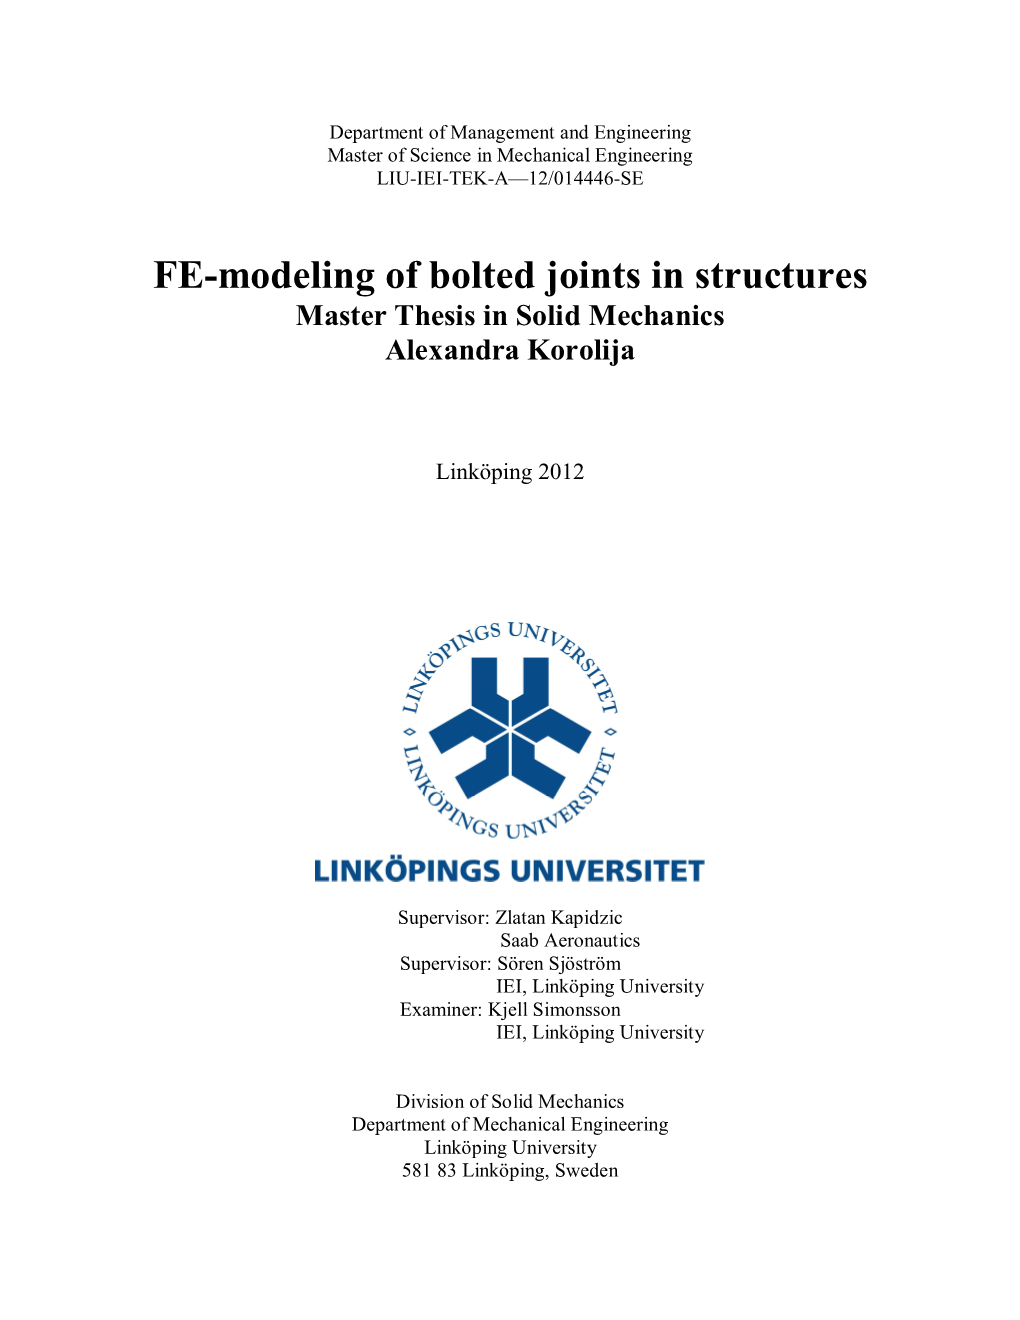 FE-Modeling of Bolted Joints in Structures Master Thesis in Solid Mechanics Alexandra Korolija